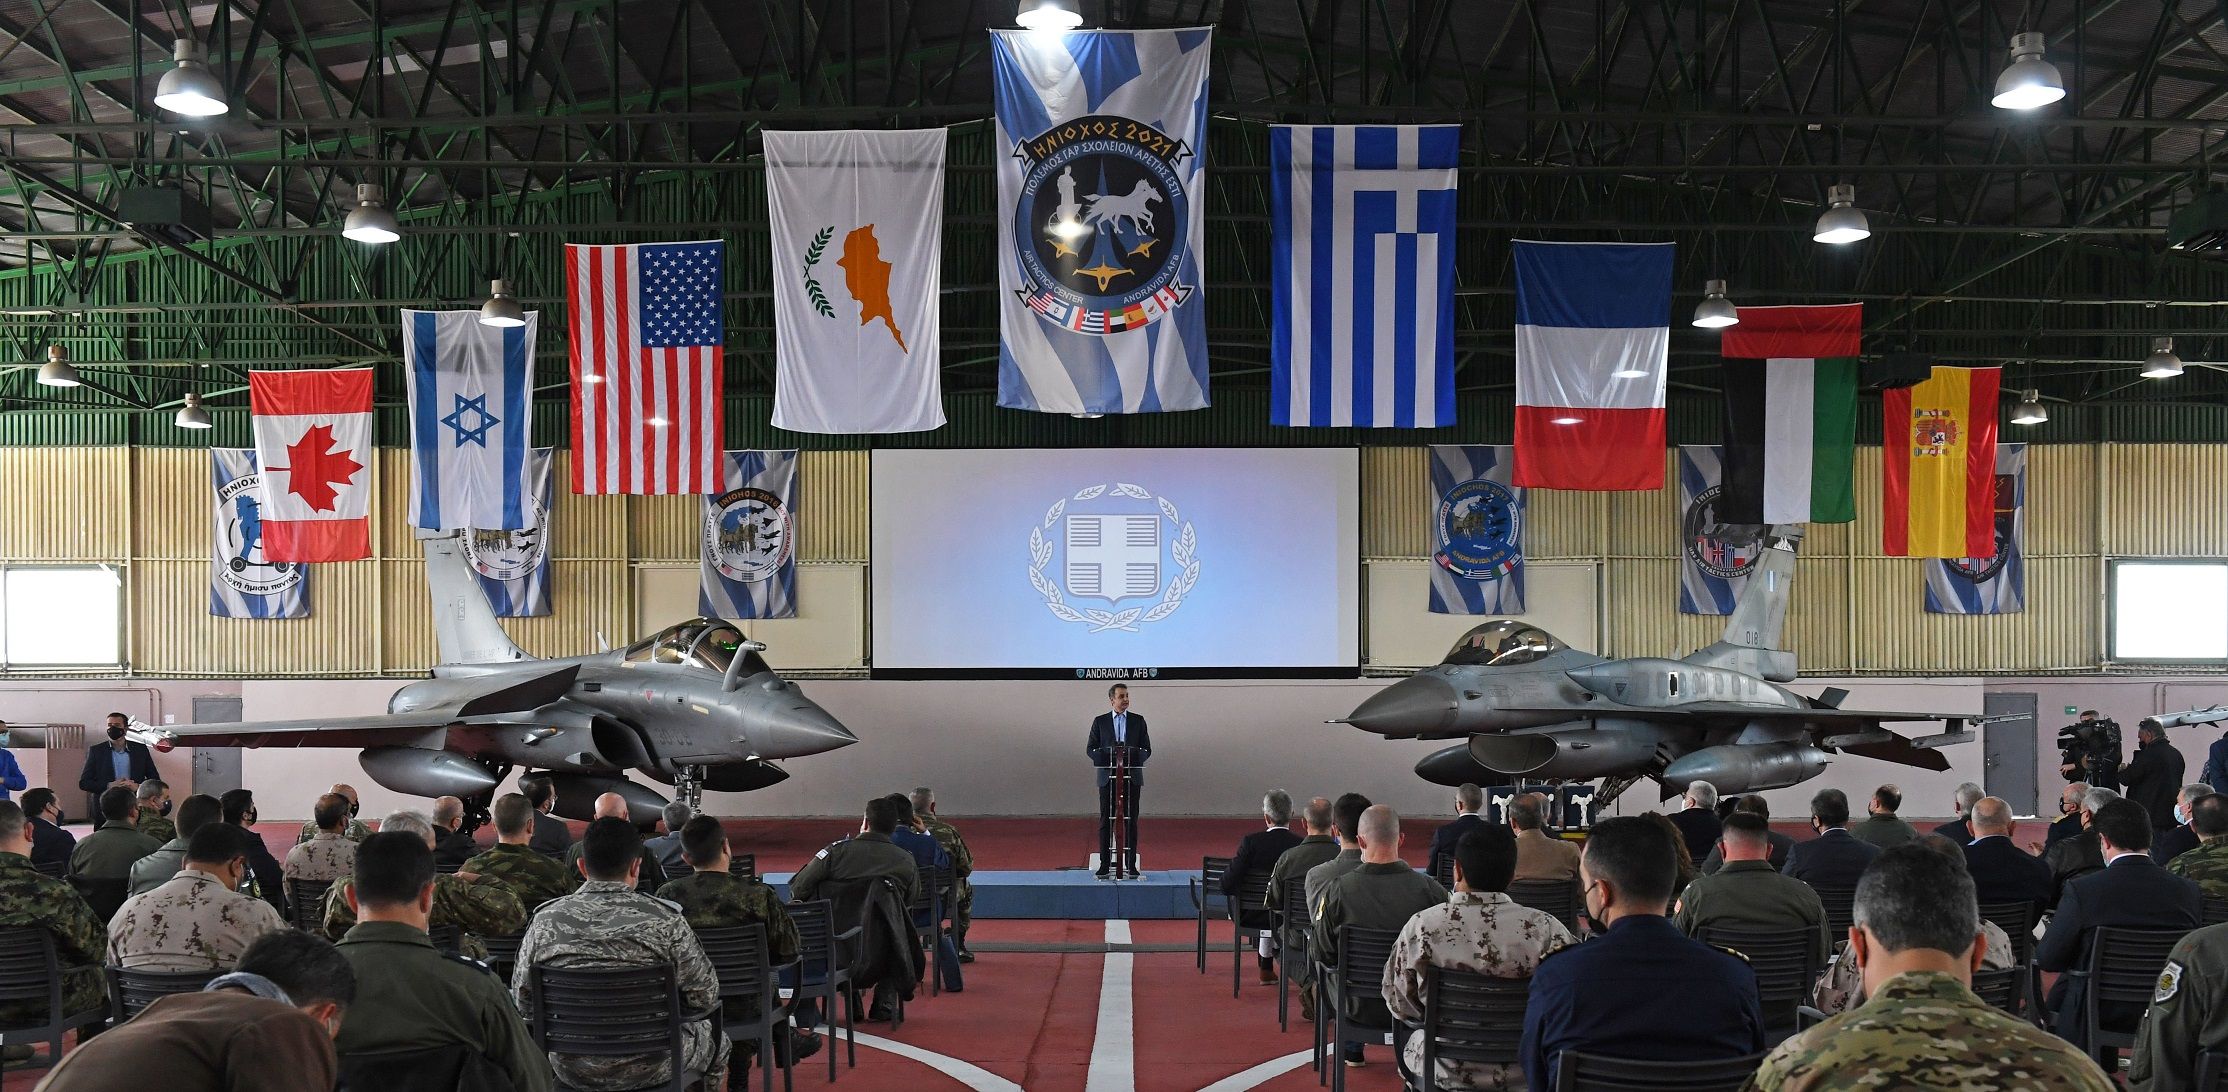 USAF 31st Wing: From İncirlik to train HAF 